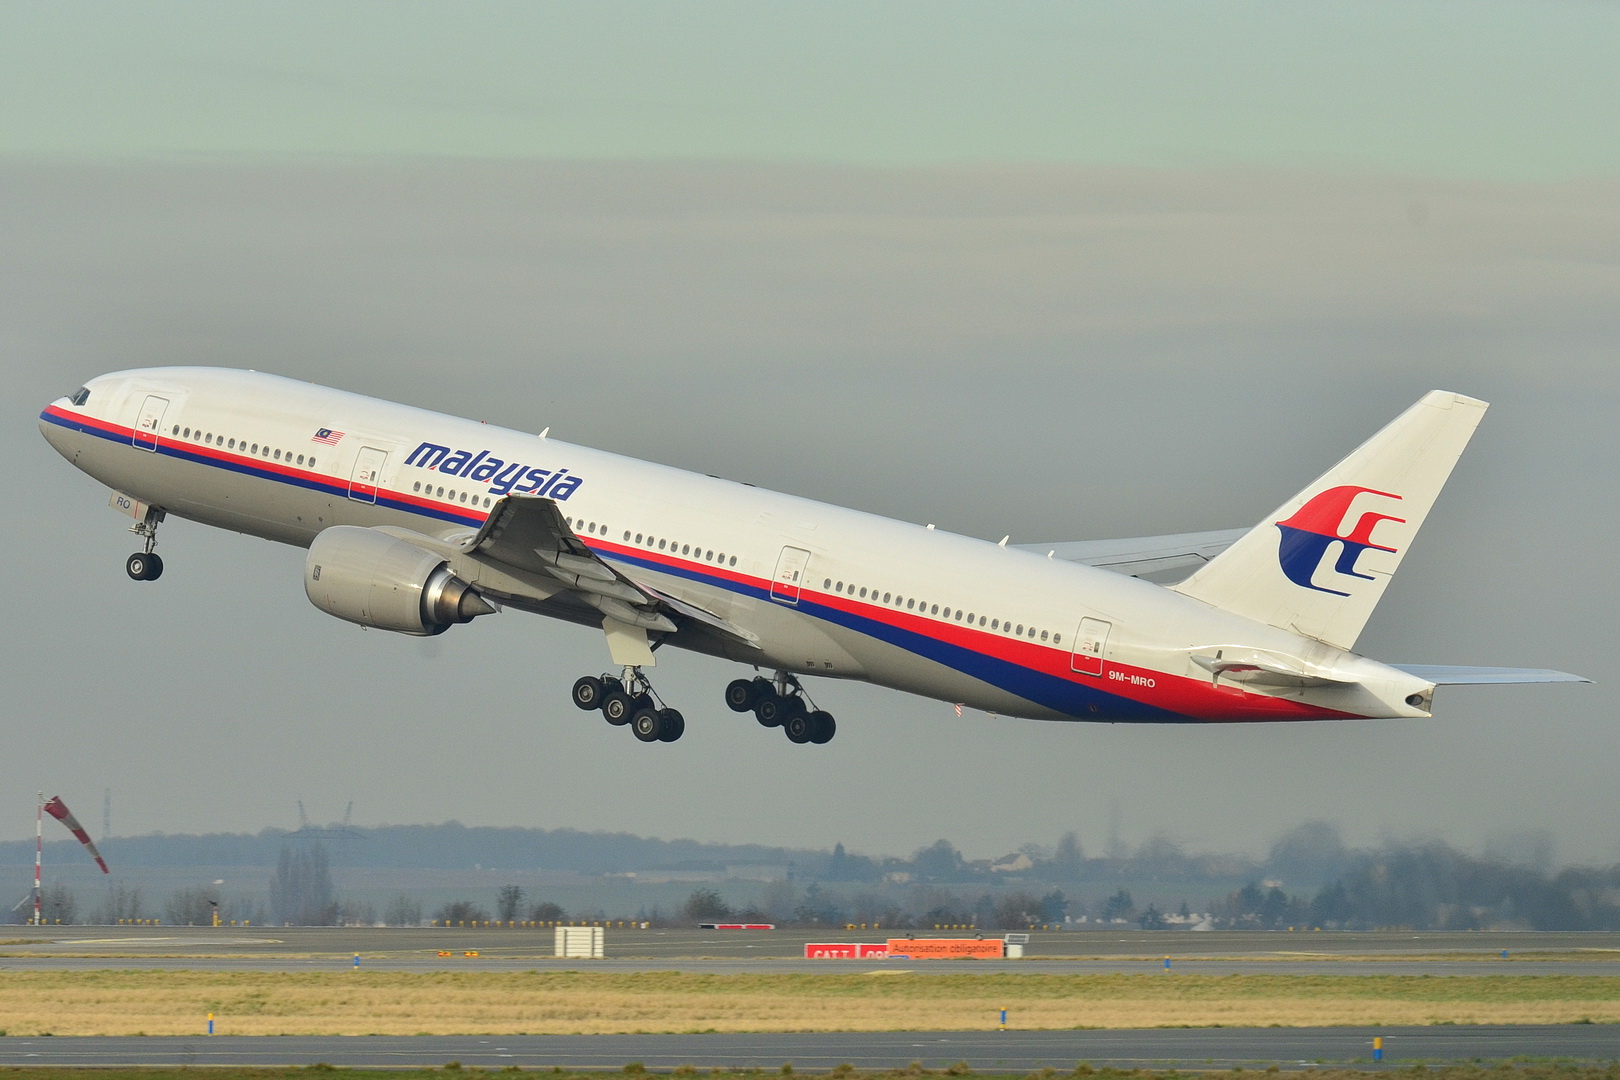 A Boeing 777 in Malaysia Airlines livery just after lifting off the runway